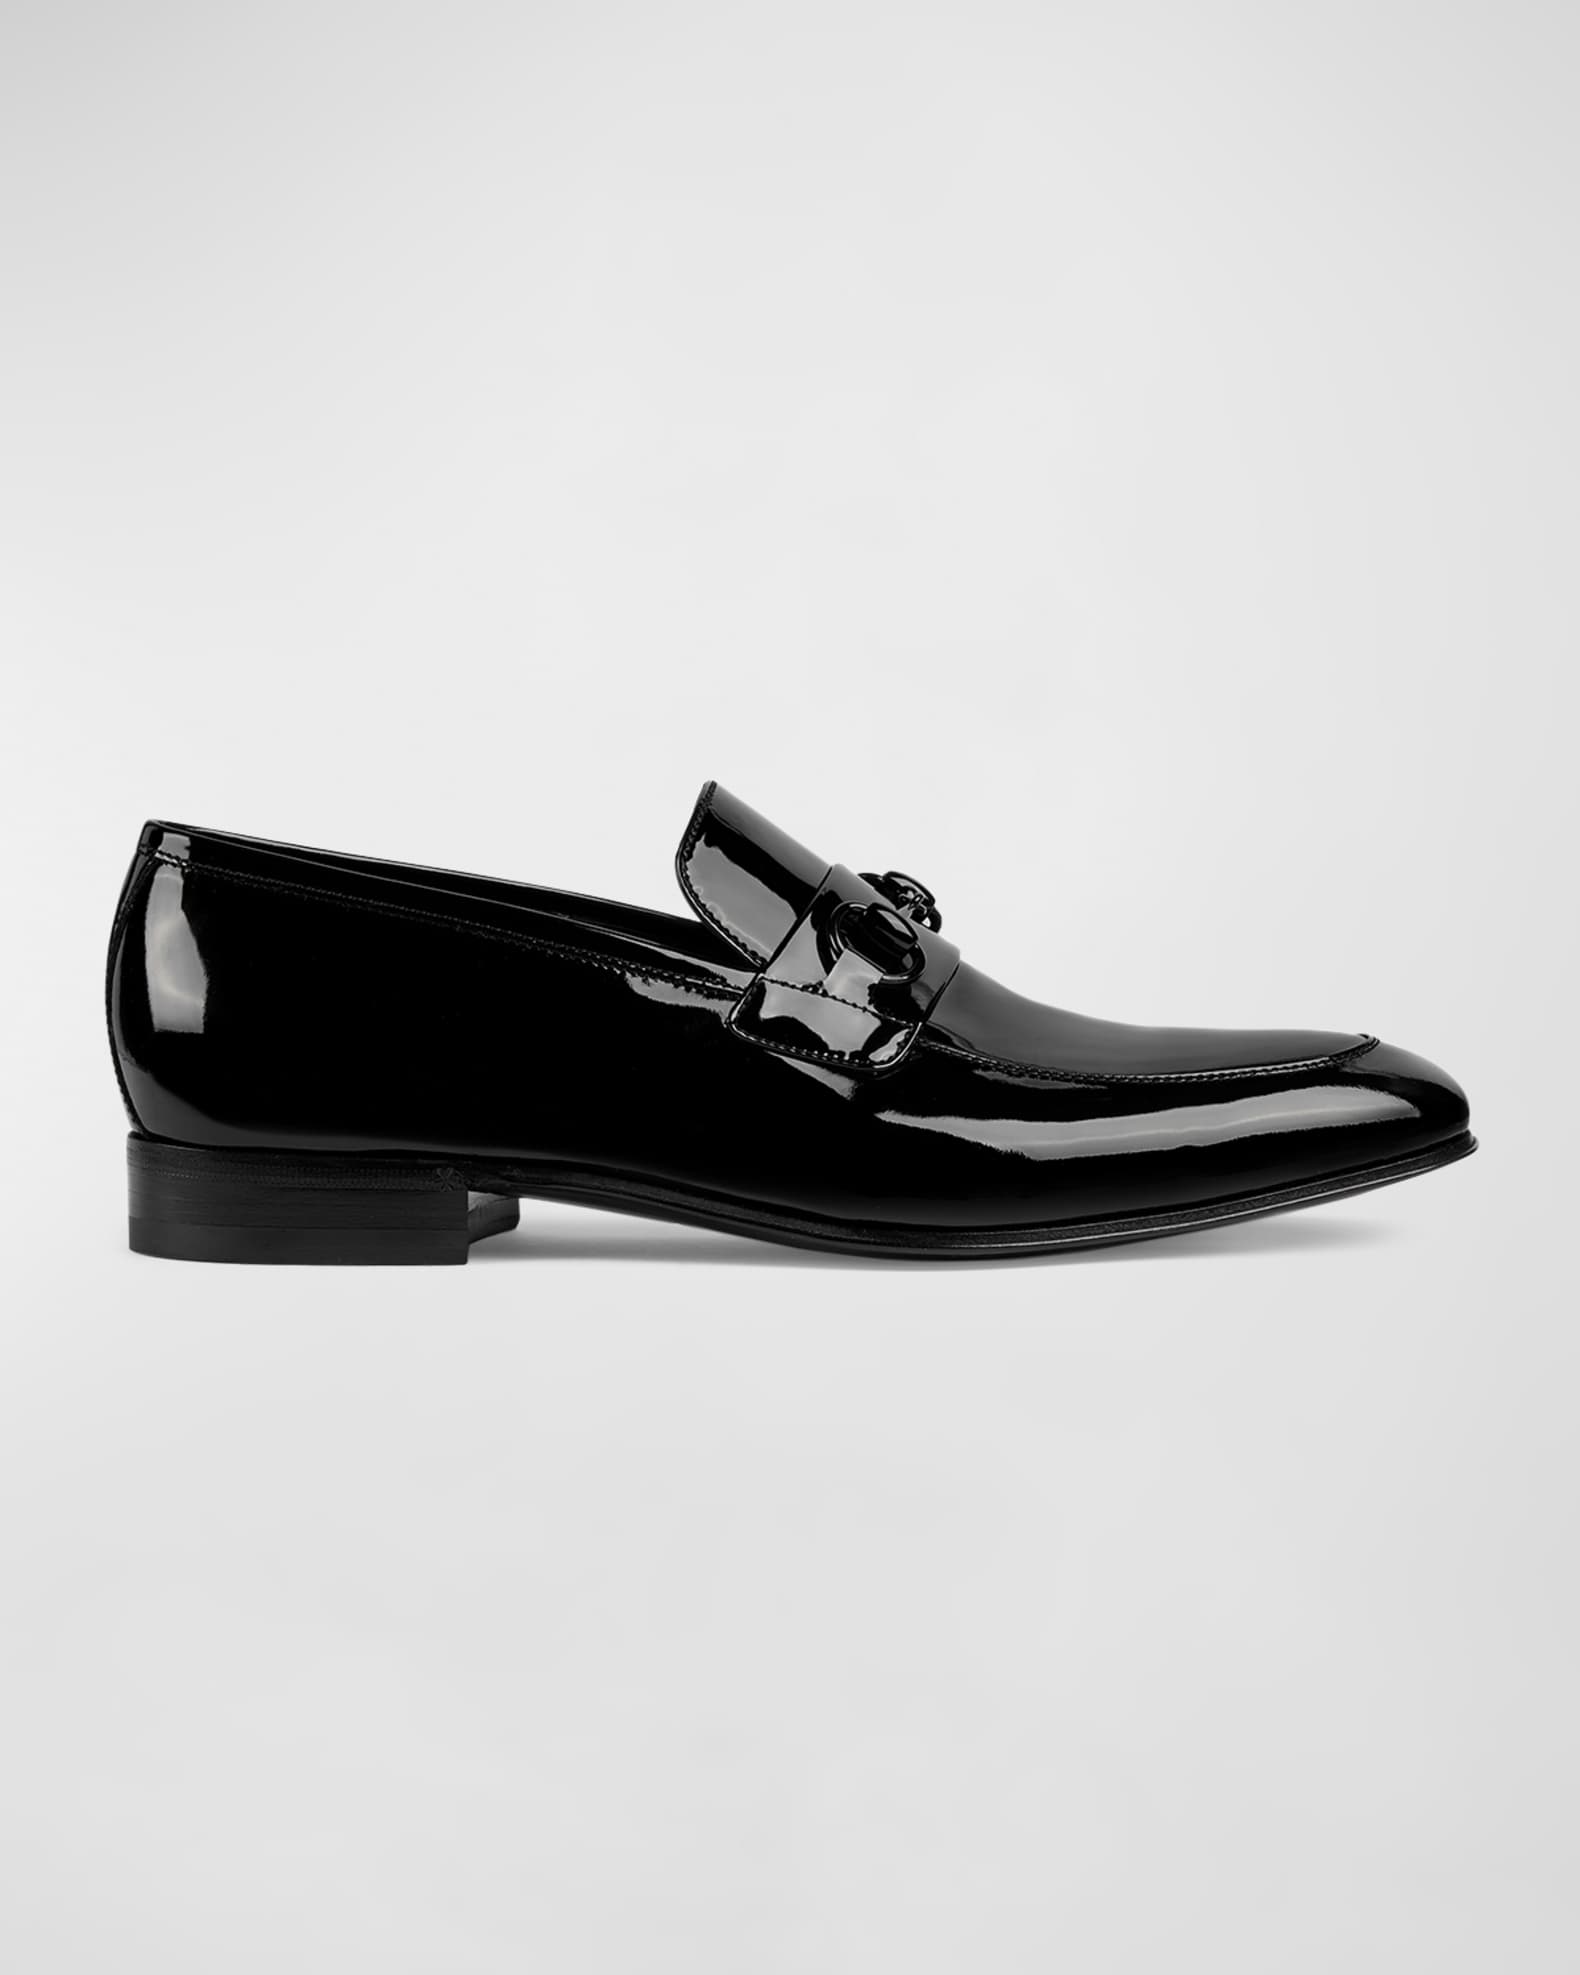 Gucci Men's Ed Patent Leather Bit Loafers | Neiman Marcus